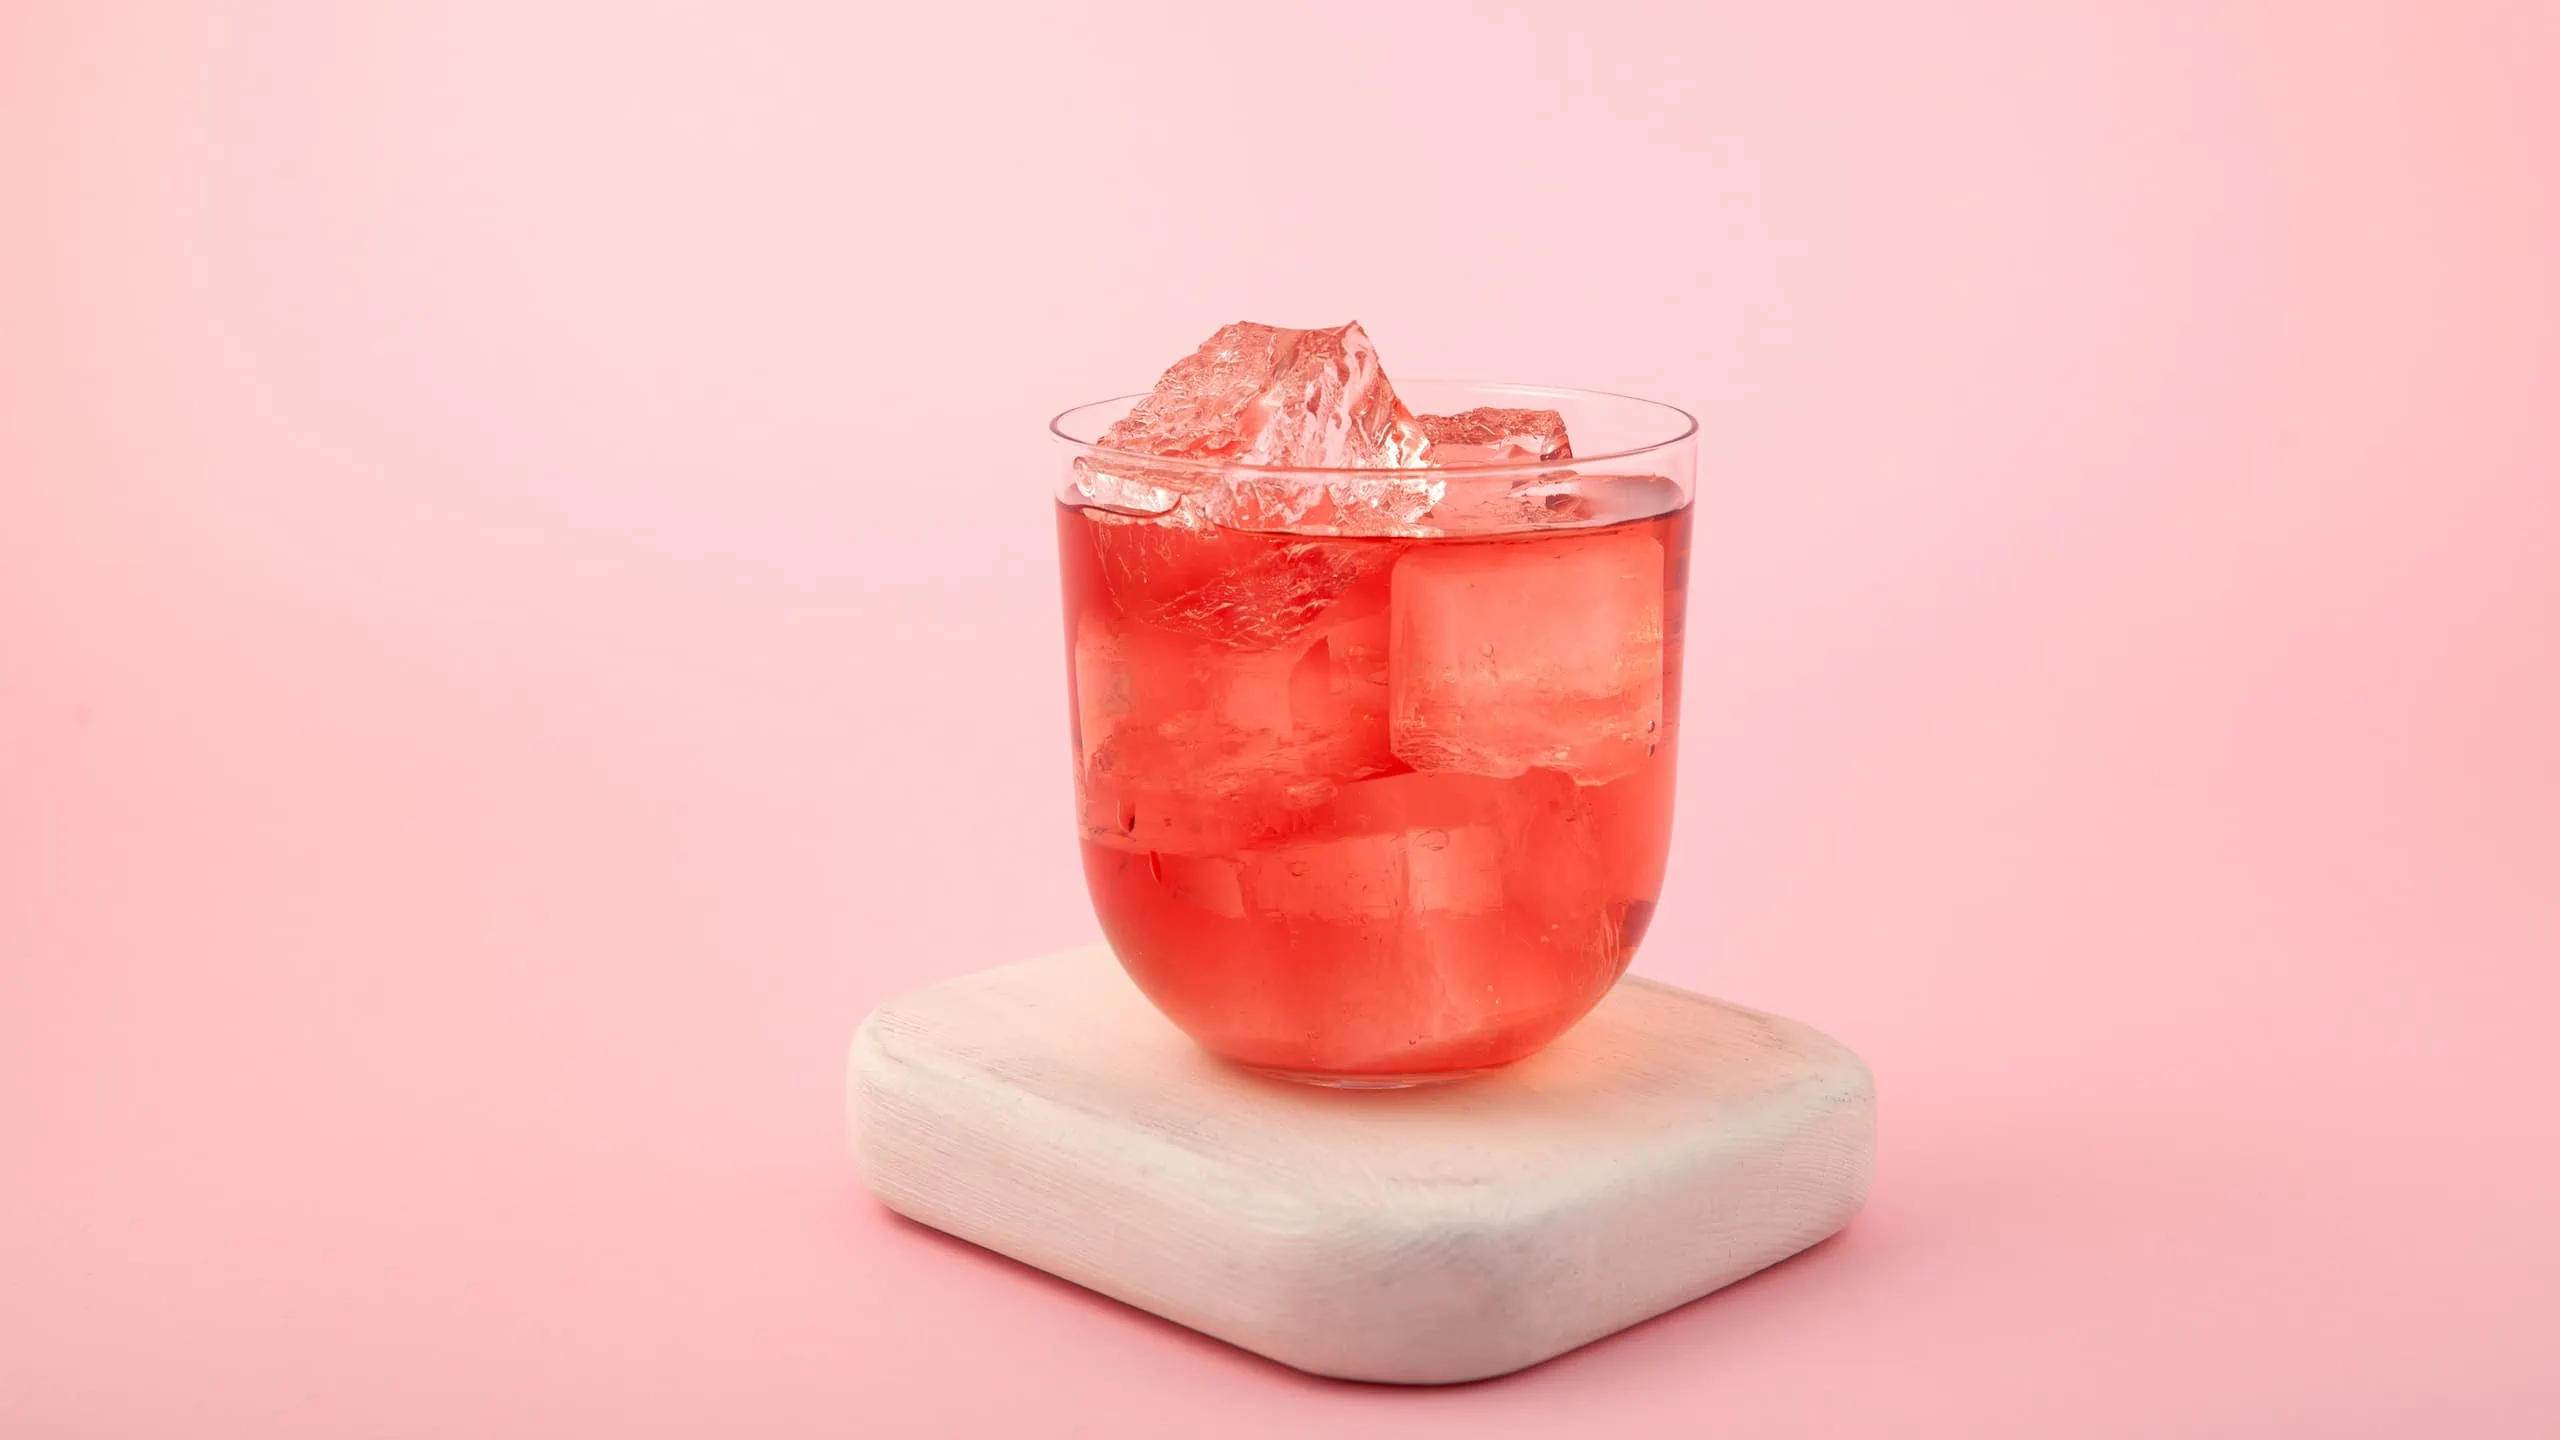 Our pink punch recipe